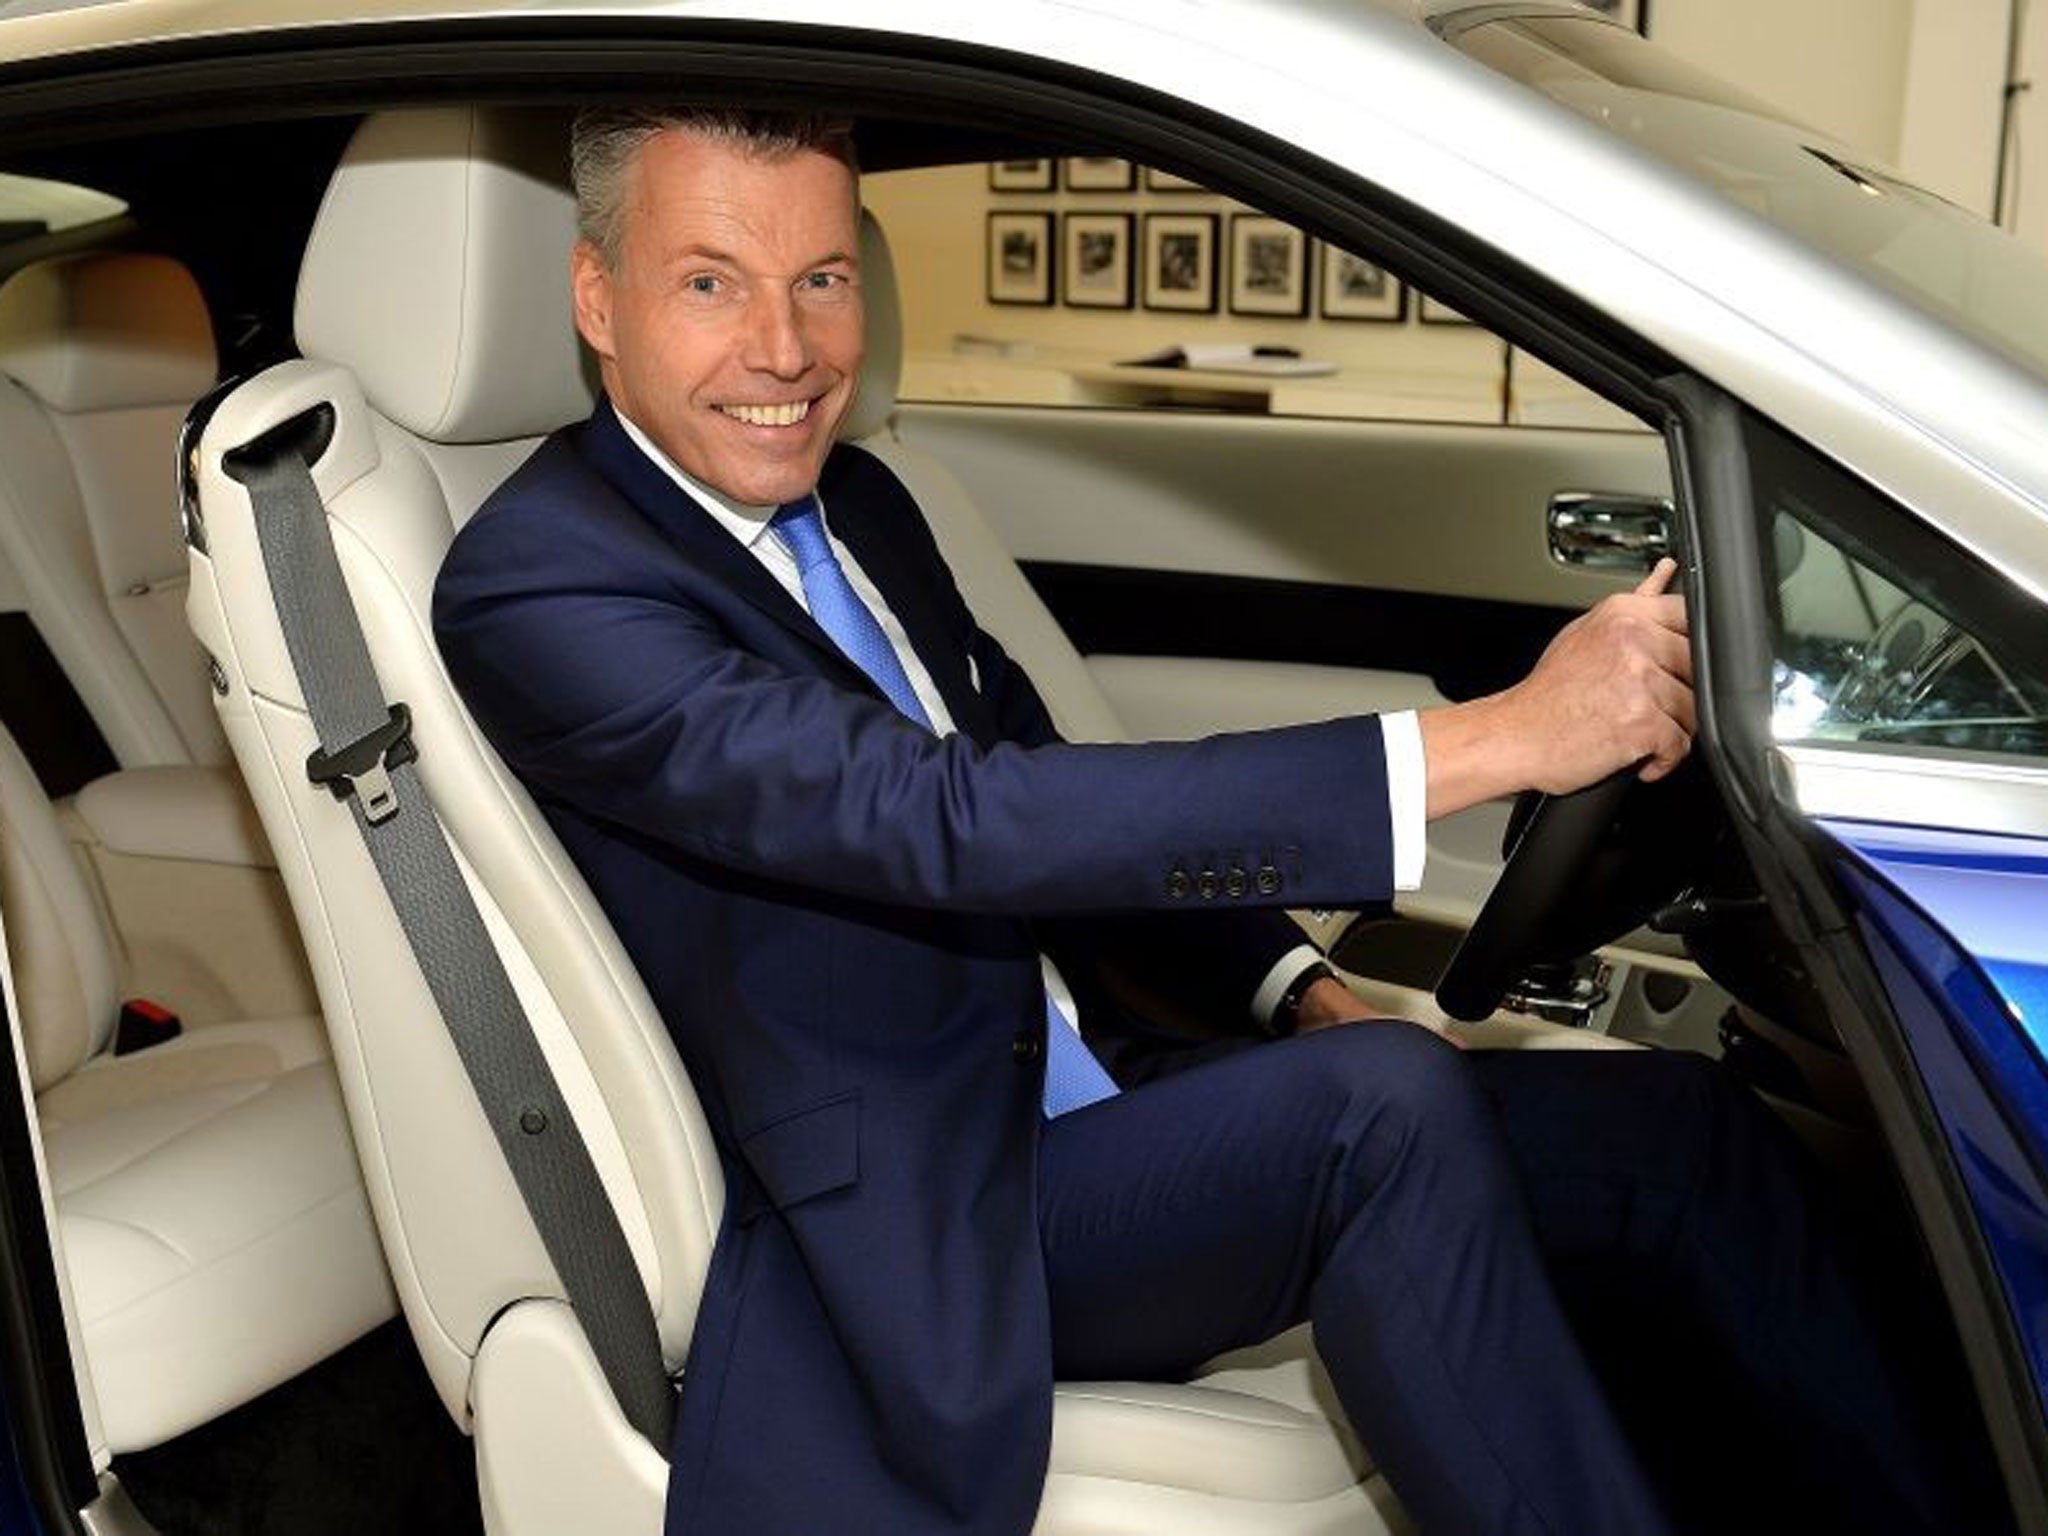 Chief executive of Rolls-Royce Motor Cars Torsten Muller Otvos sits in a Rolls-Royce car in the company's Berkley Square showroom in Mayfair, London